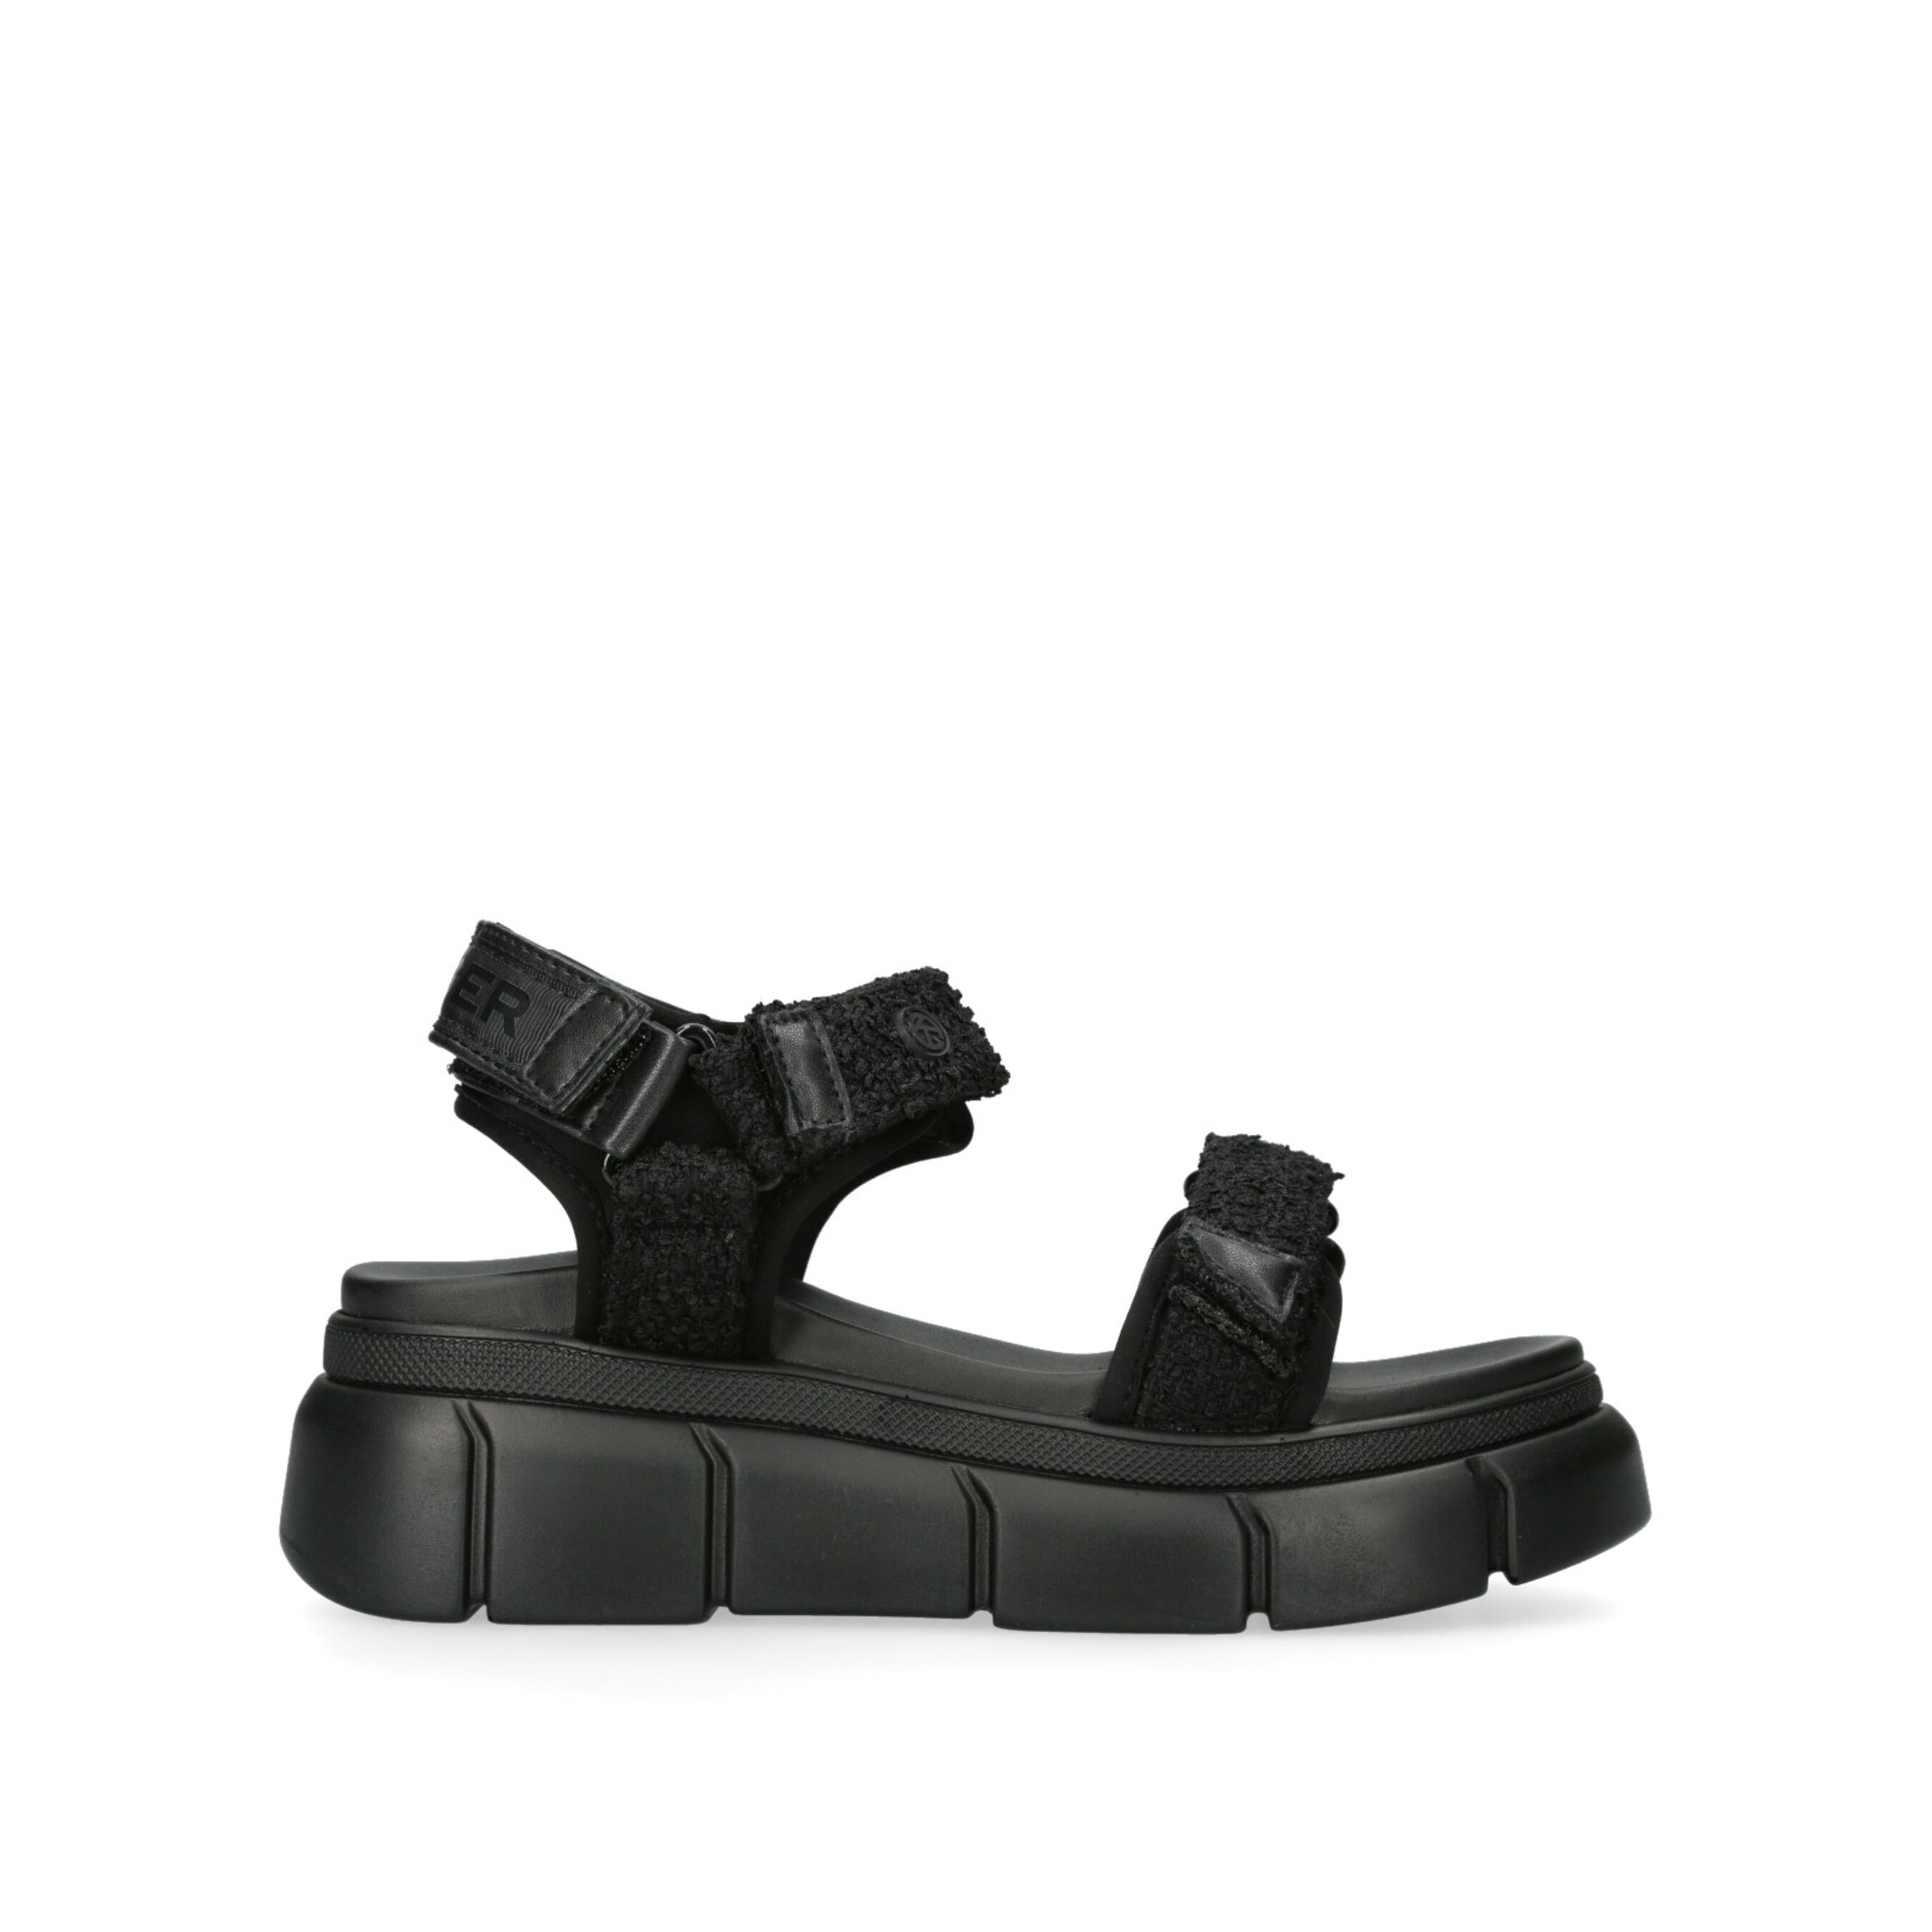 The Rigged sandals feature black tweed fabric on the velcro straps.  The back of the ankle features KG Kurt Geiger logo printed on ribbed textile with a print stitch detailing tape. Sole height: 4cm. This product is registered with The Vegan Society.